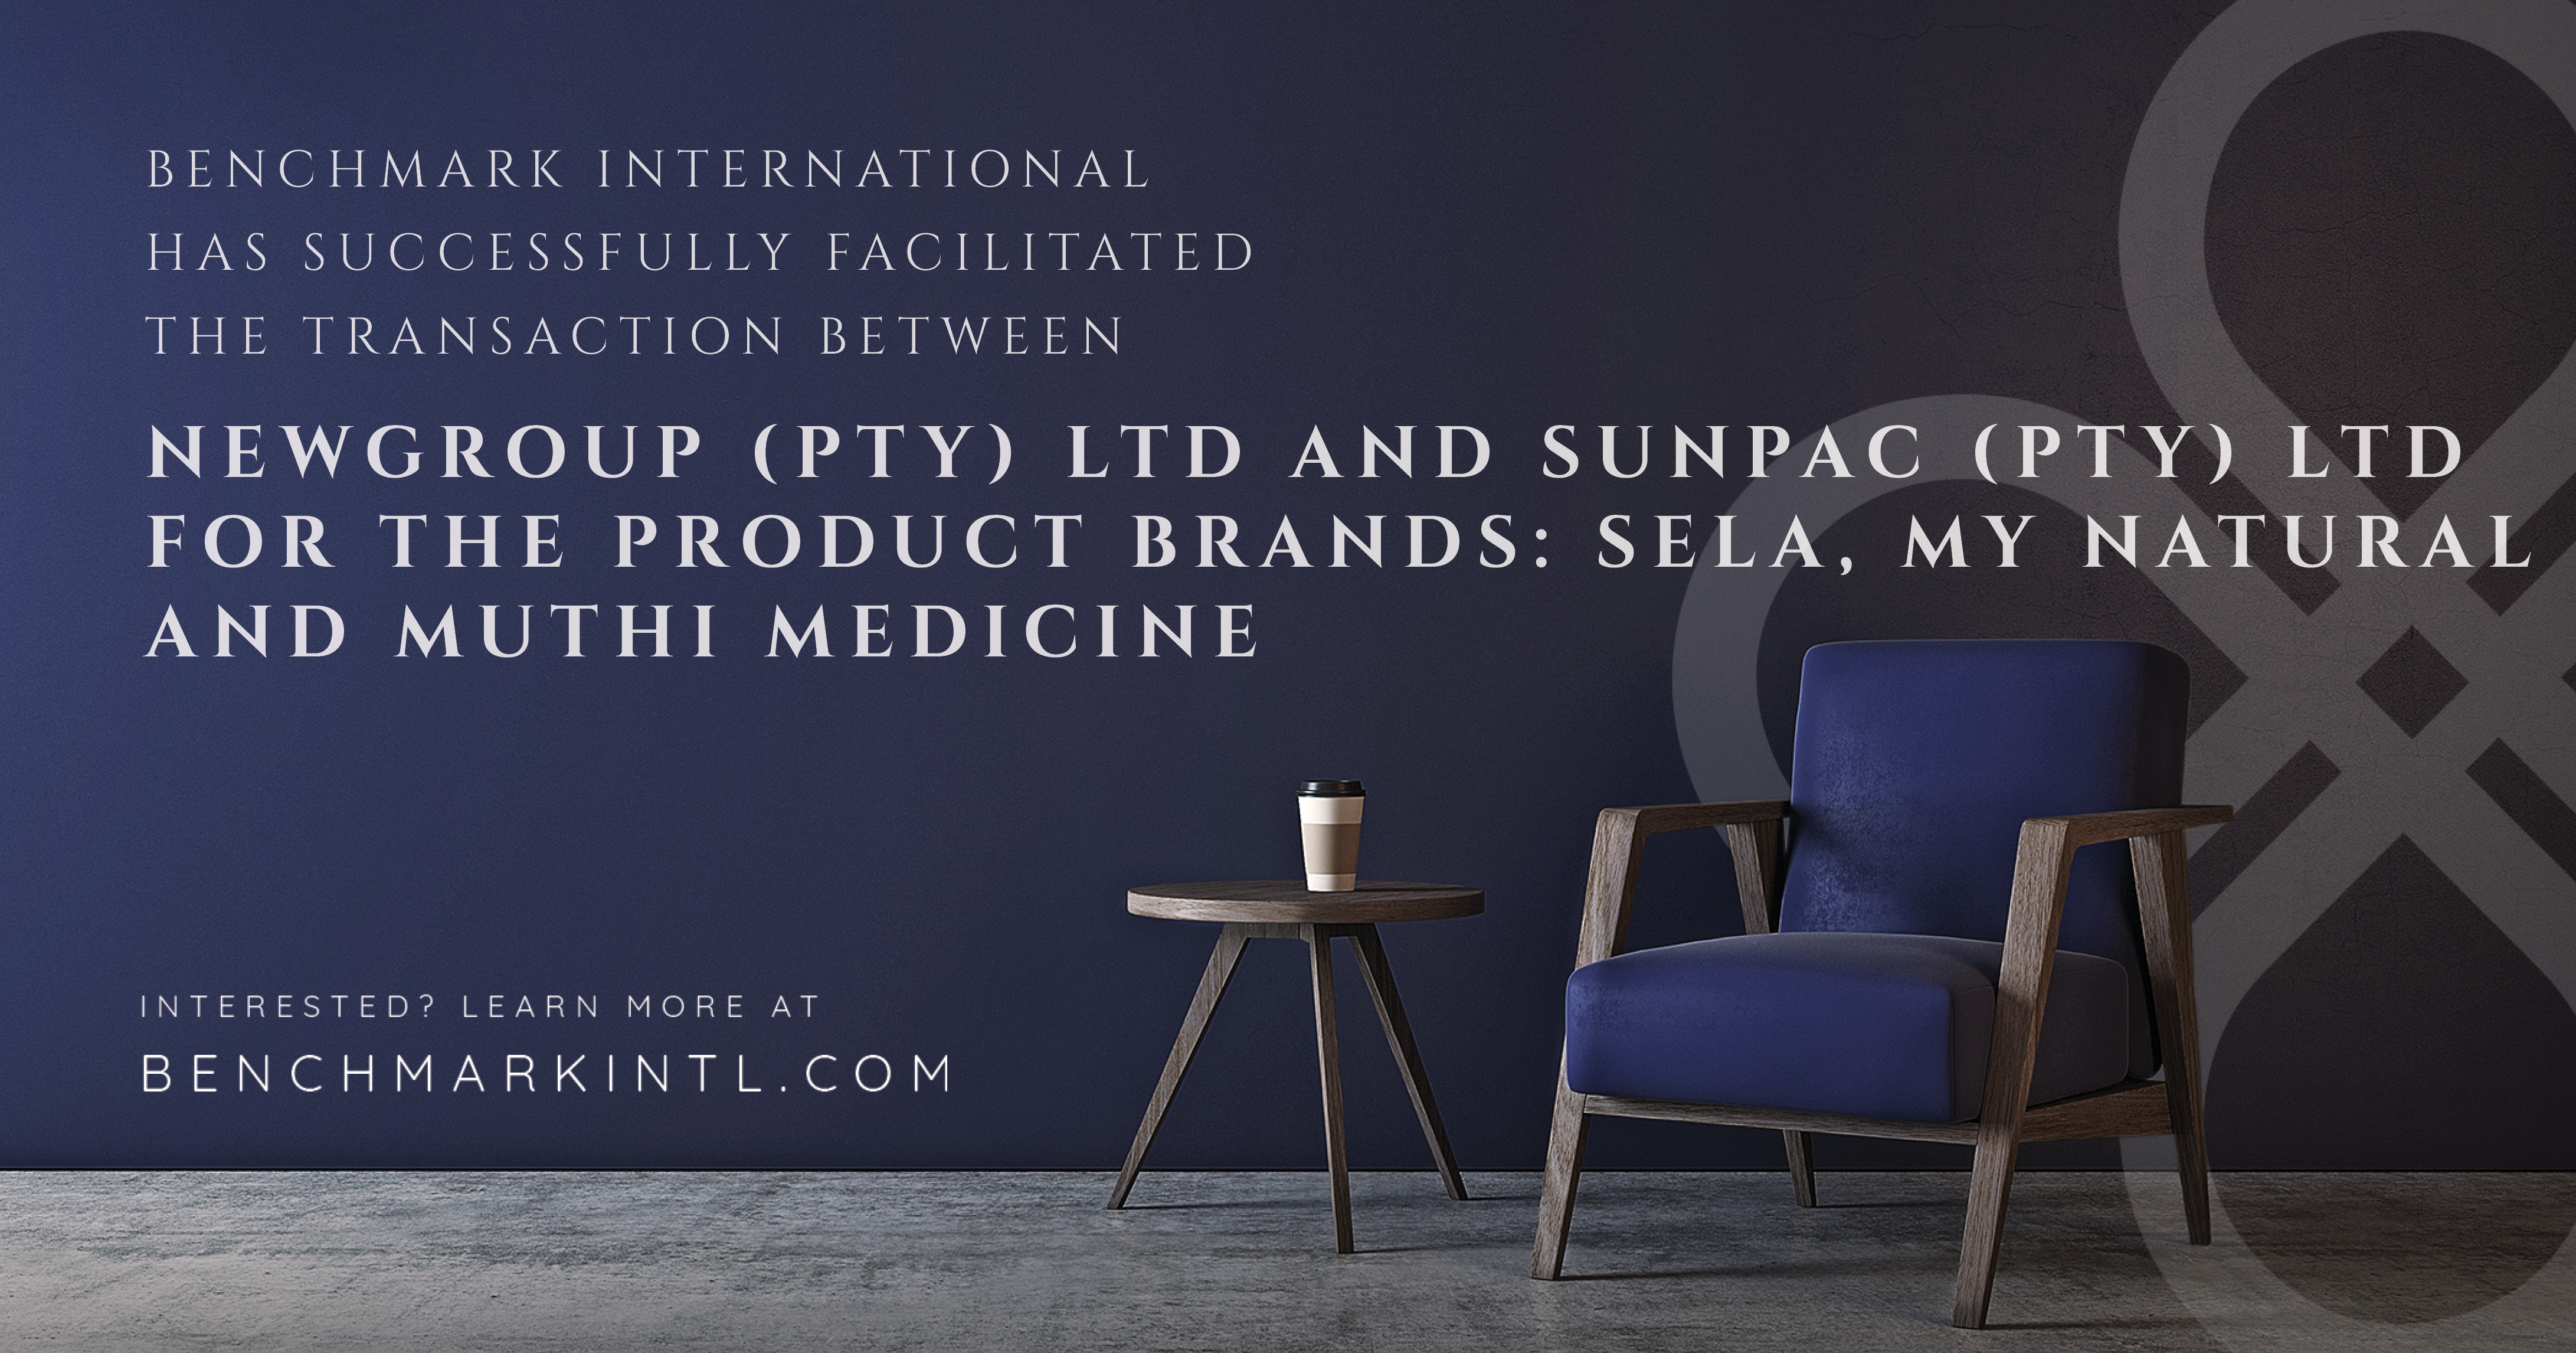 Benchmark International Successfully Facilitated the Transaction Between Newgroup (PTY) LTD and Sunpac (PTY) LTD for the Product Brands: Sela, My Natural and Muthi Medicine